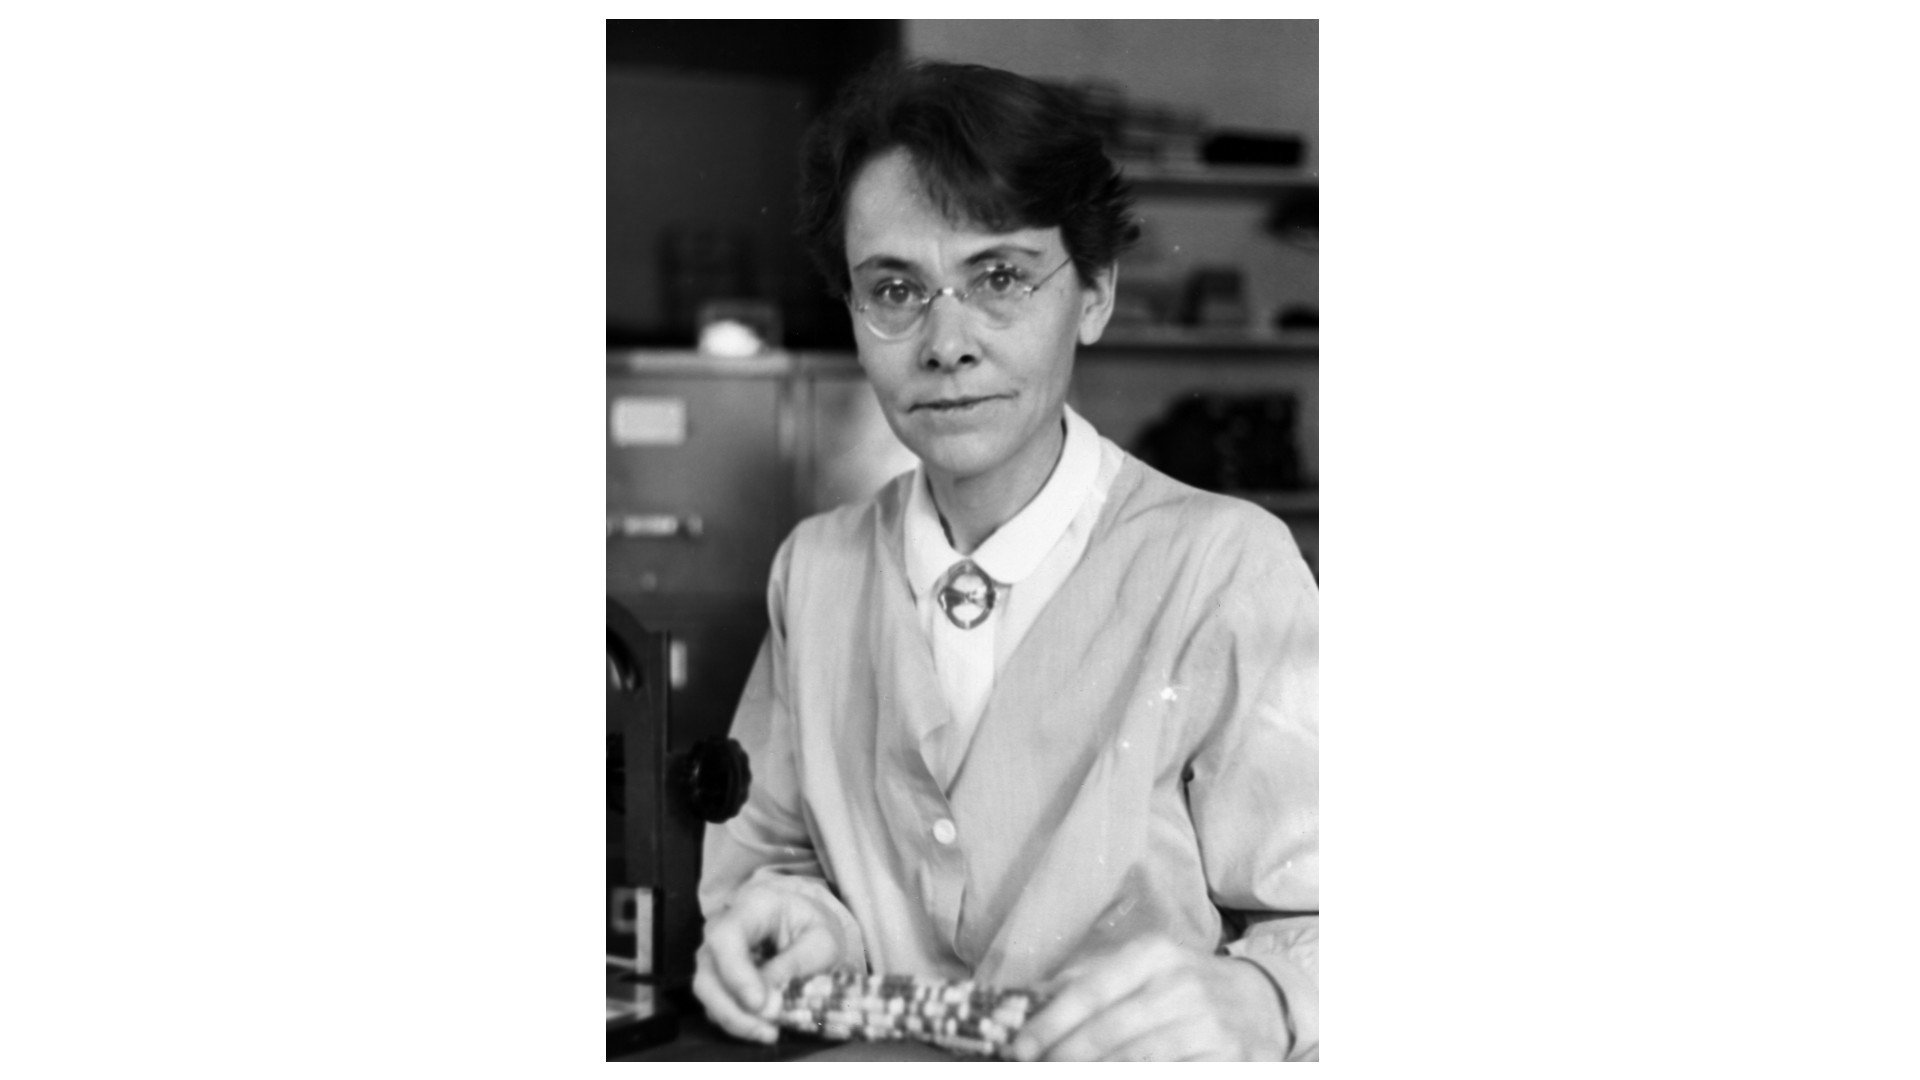 1947 portrait of Barbara McClintock (1902-1992) an American geneticist who won the 1983 Nobel Prize in Physiology or Medicine for her discovery of genetic transposition. (Photo by: Universal History Archive/Universal Images Group via Getty Images)